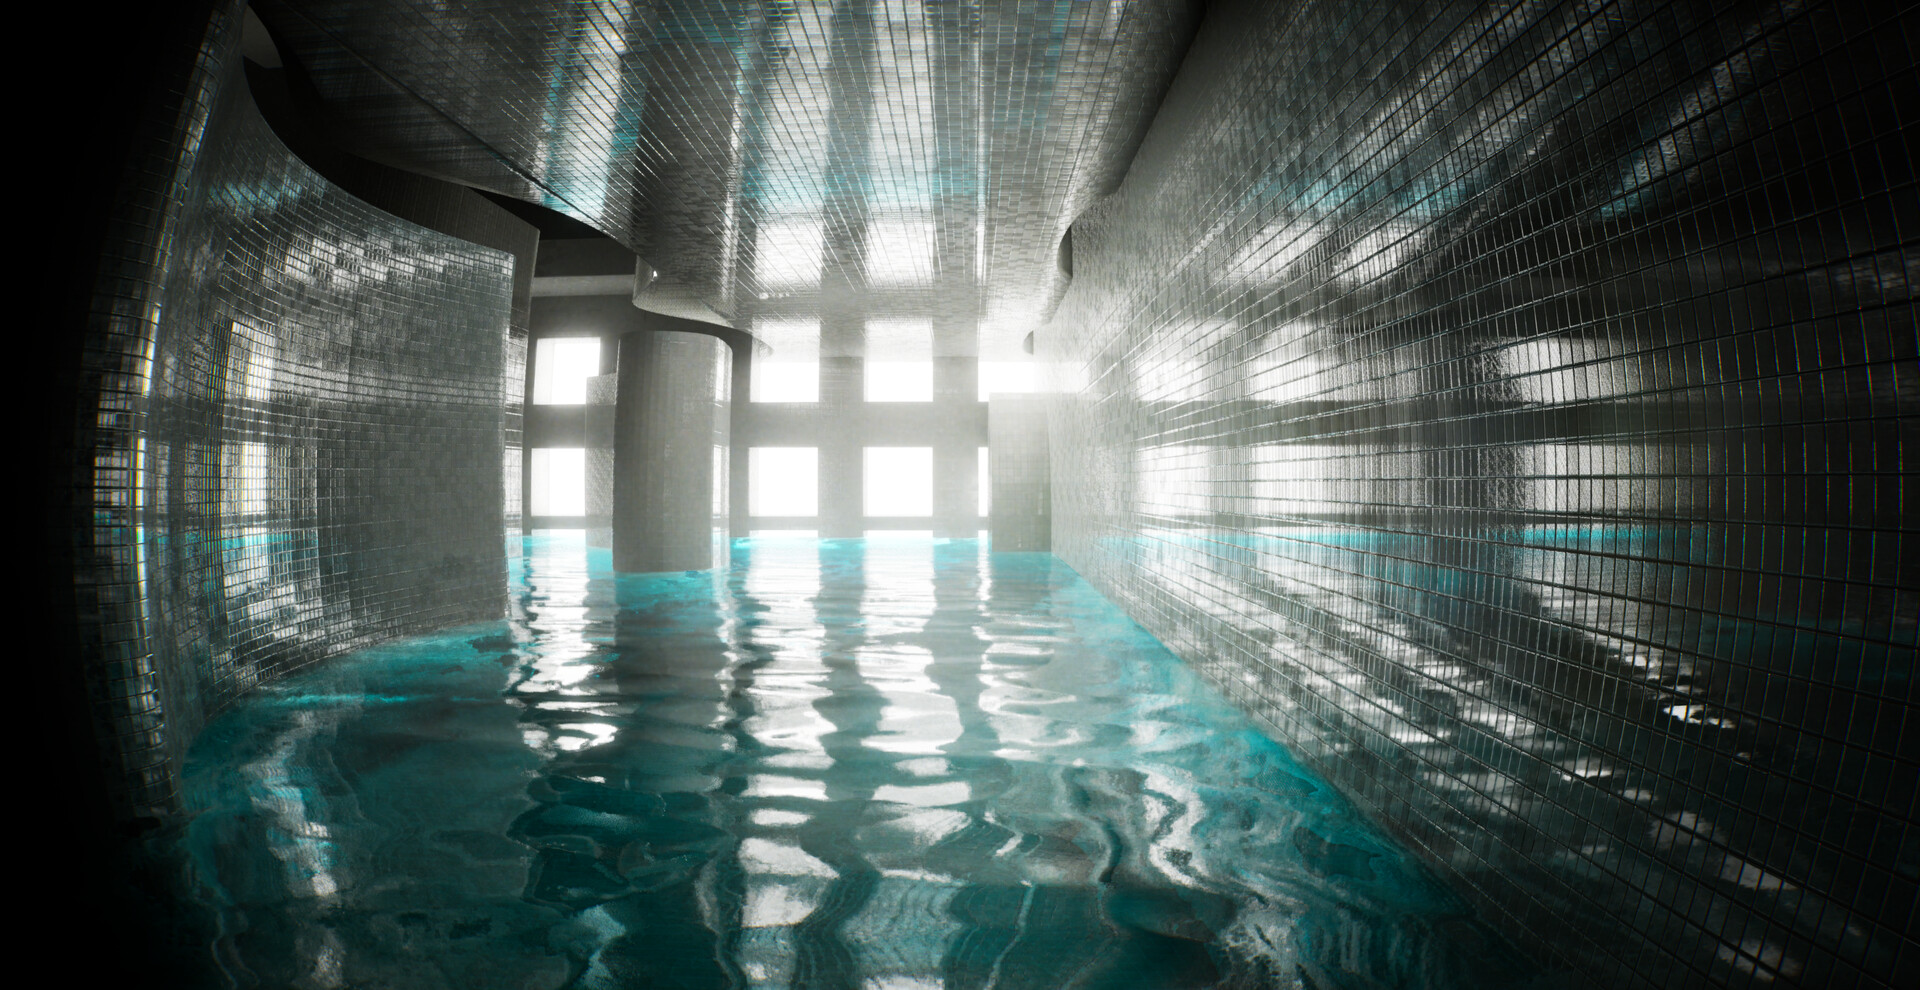 Escape the Backrooms Part 5! Find out what lies beyond the pool